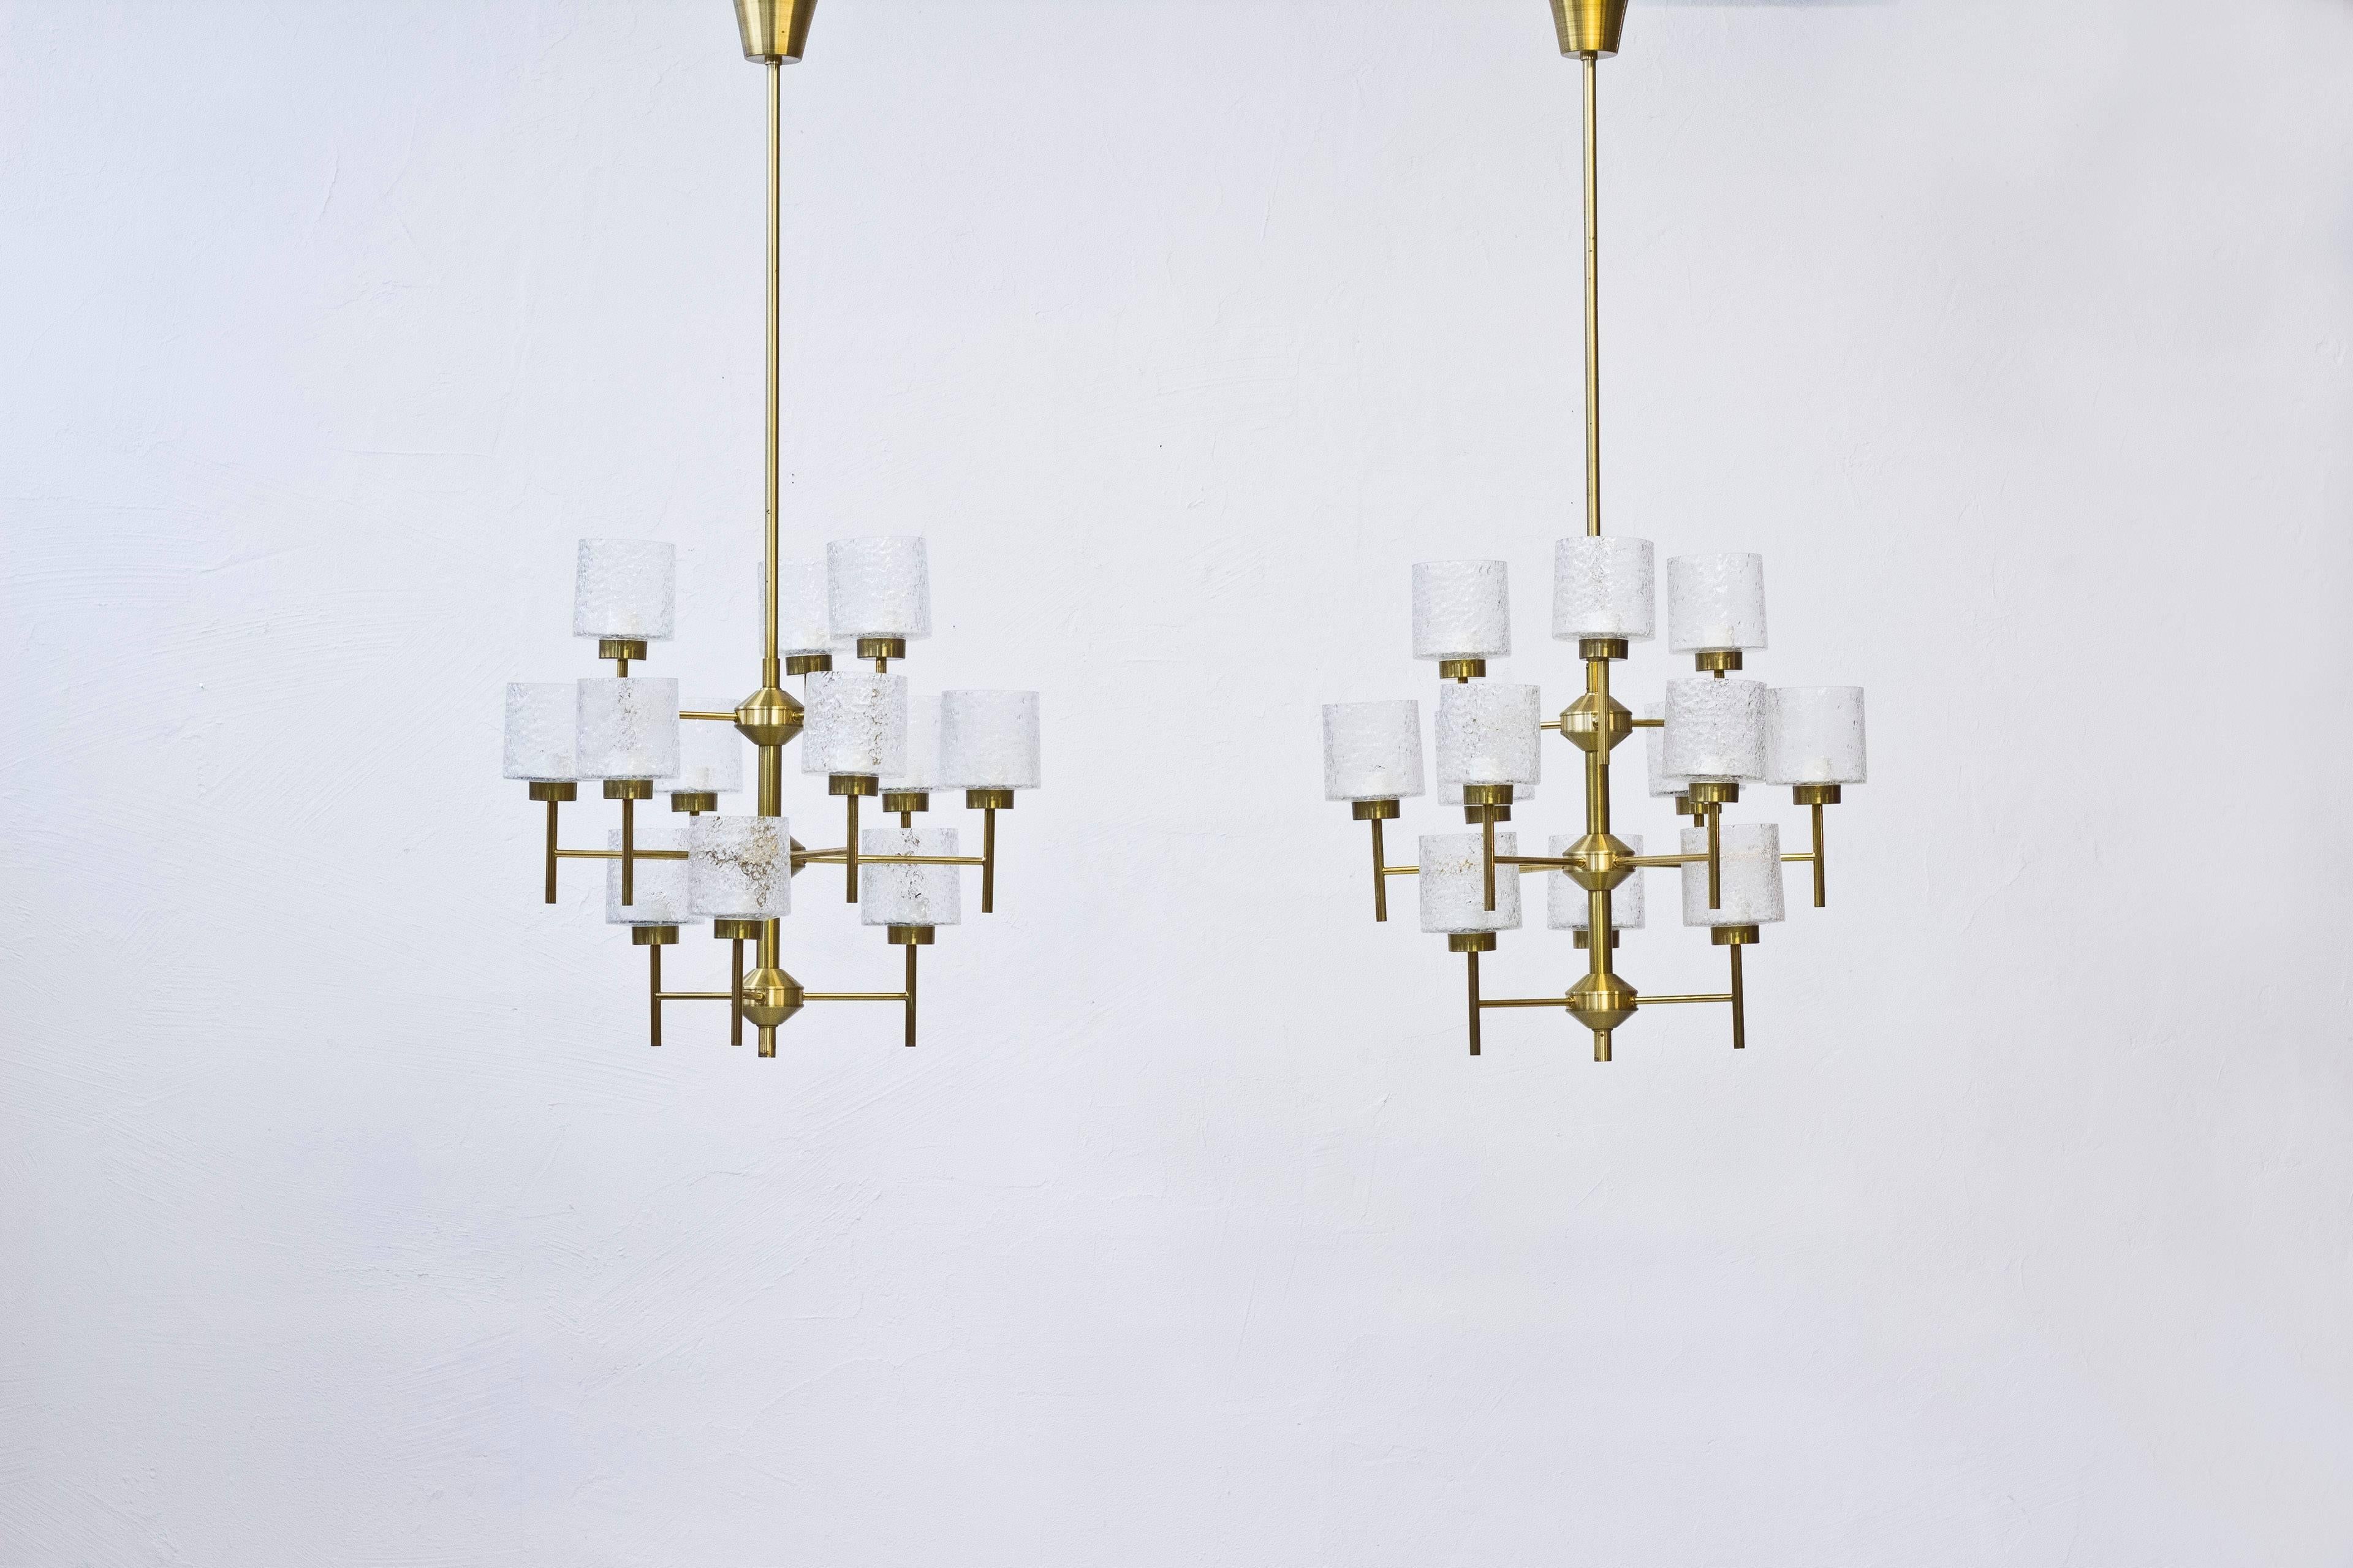 Set of four chandeliers designed by Holger Johansson. Produced in Sweden during the 1960s by Westal. Made from brass with 12 handblown clear glass shades with bubbles. Excellent vintage condition with very few signs of wear. Adjustable in height.